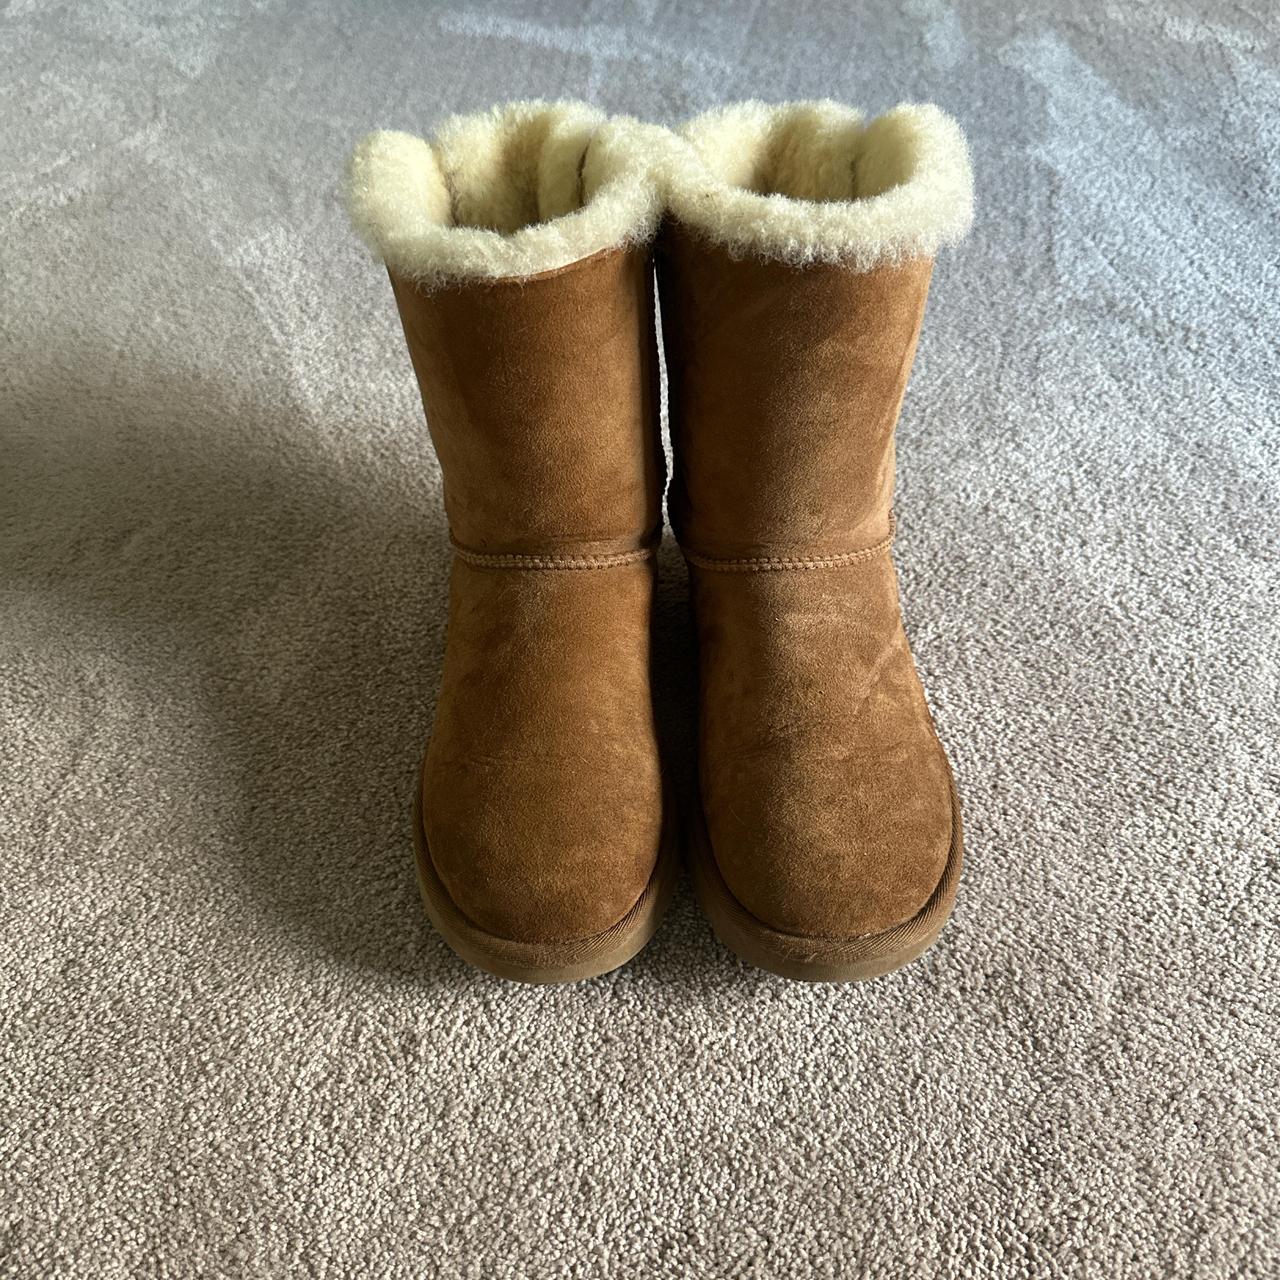 Bow Uggs in chestnut Fit true to size 7 Cozy and... - Depop